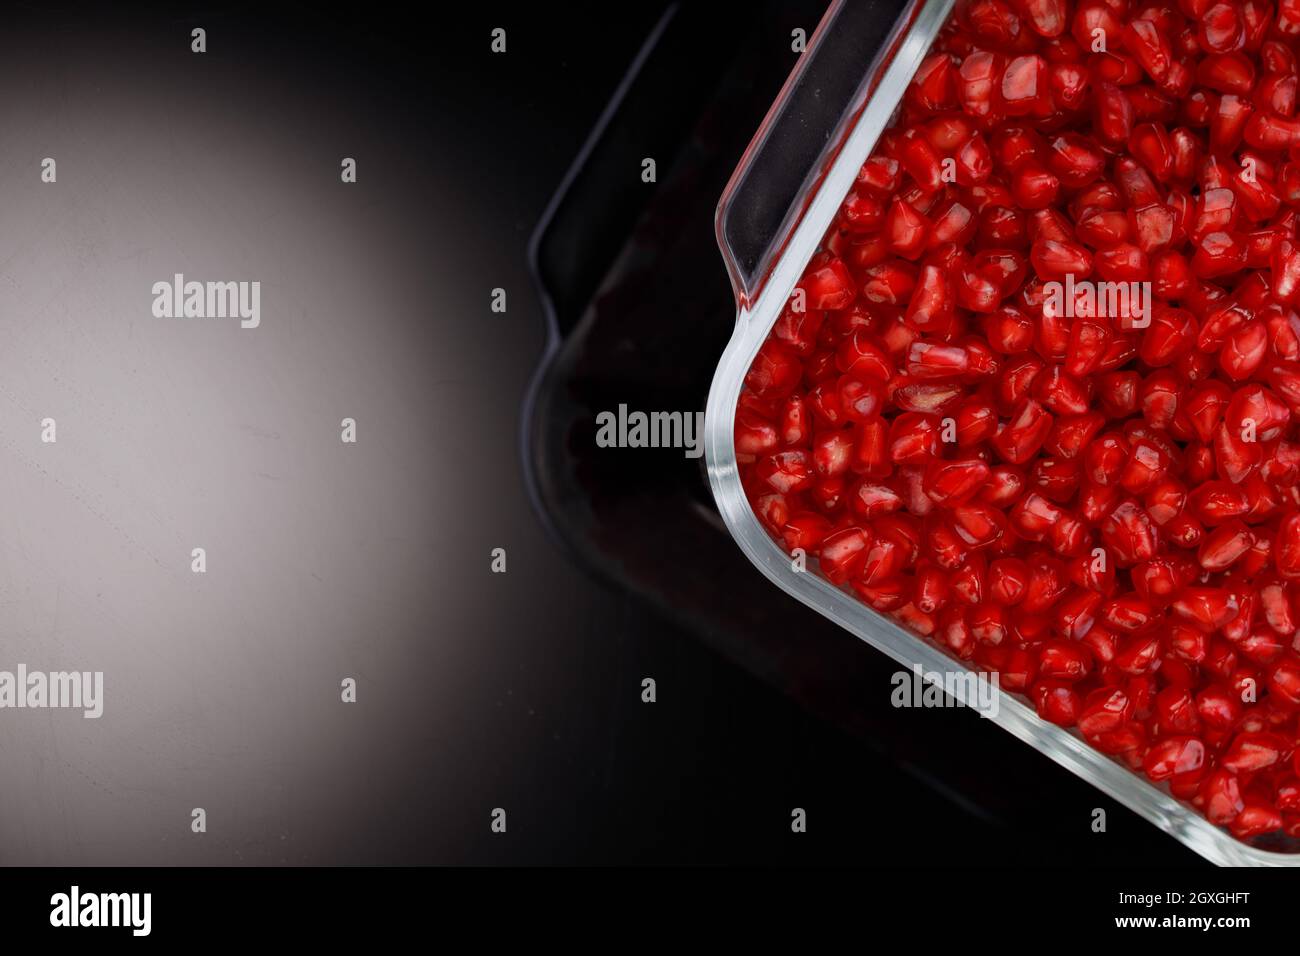 Fresh Pomegranate seed arranged in a square glass container with fresh fruit placed beside it on grey background, isolated. Stock Photo